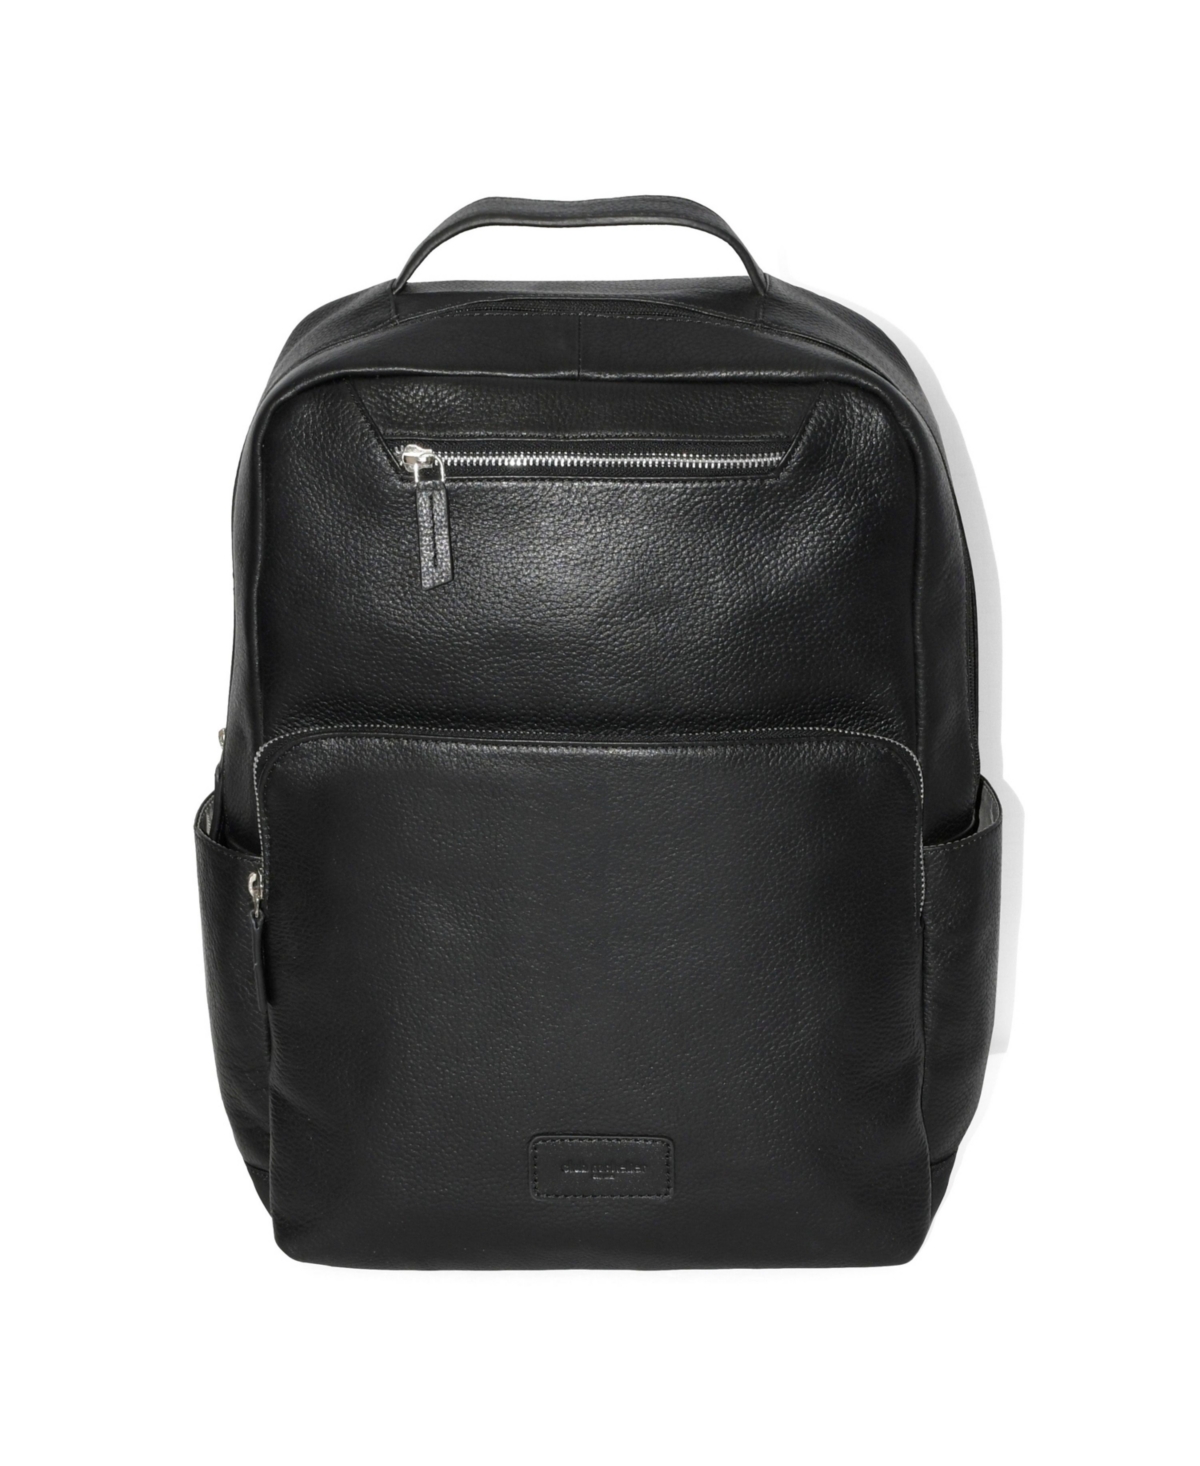 Leather Dual Front Organizer Backpack - Black